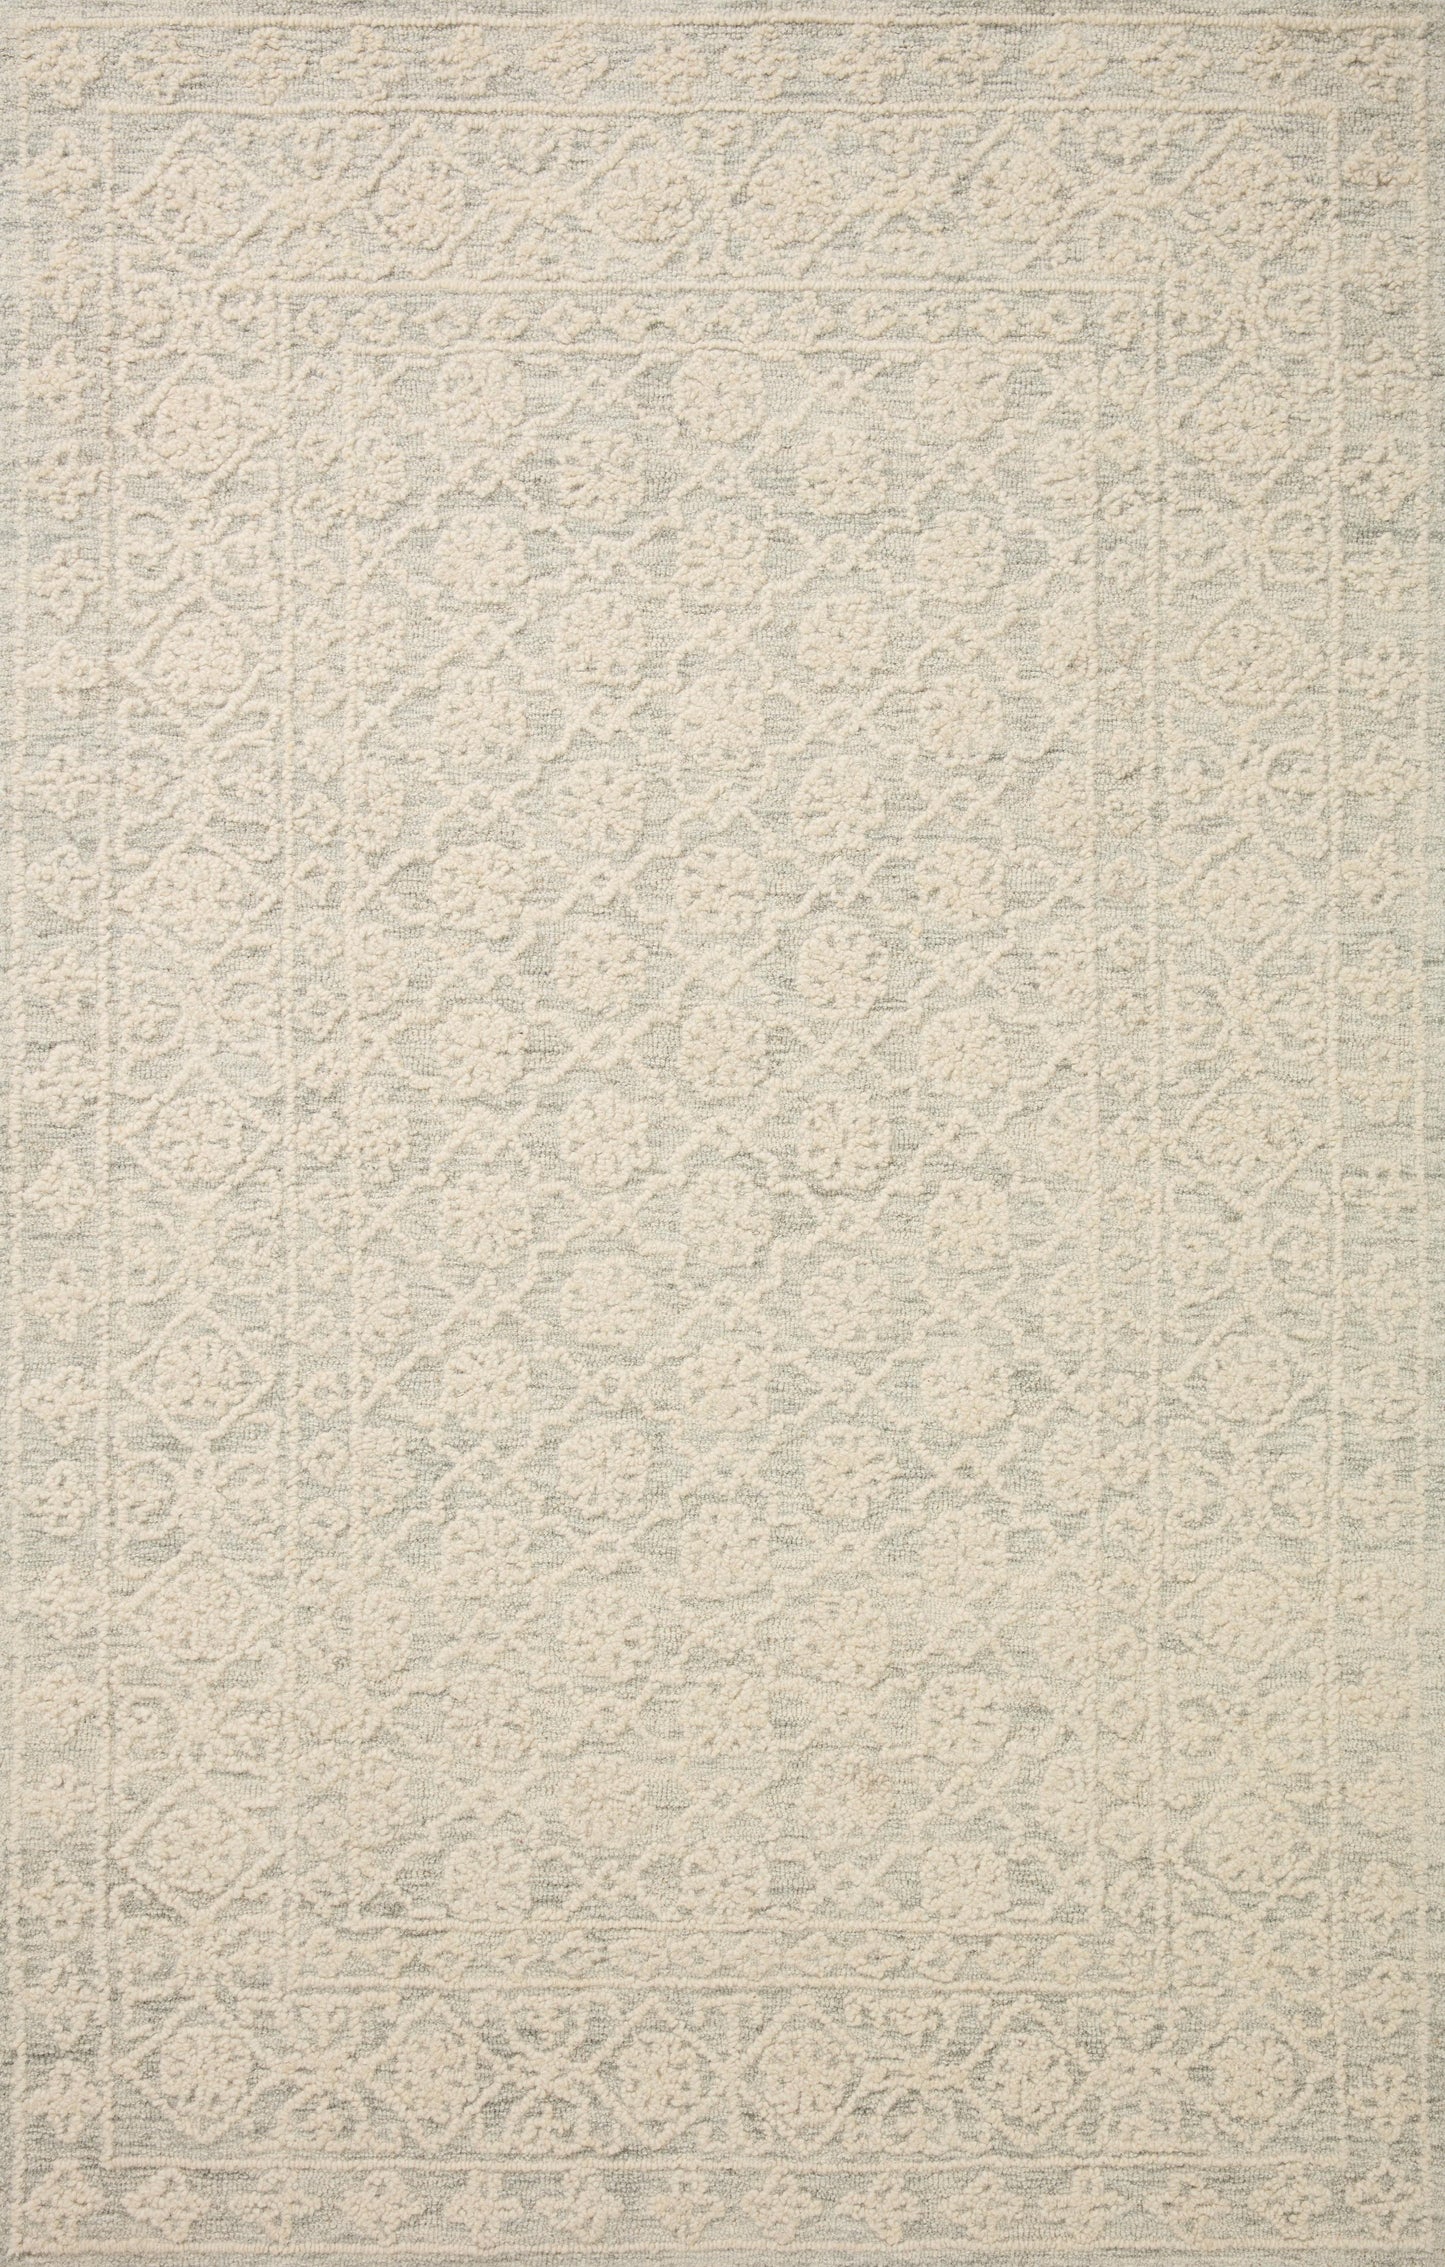 A picture of Loloi's Cecelia rug, in style CEC-01, color Mist / Ivory